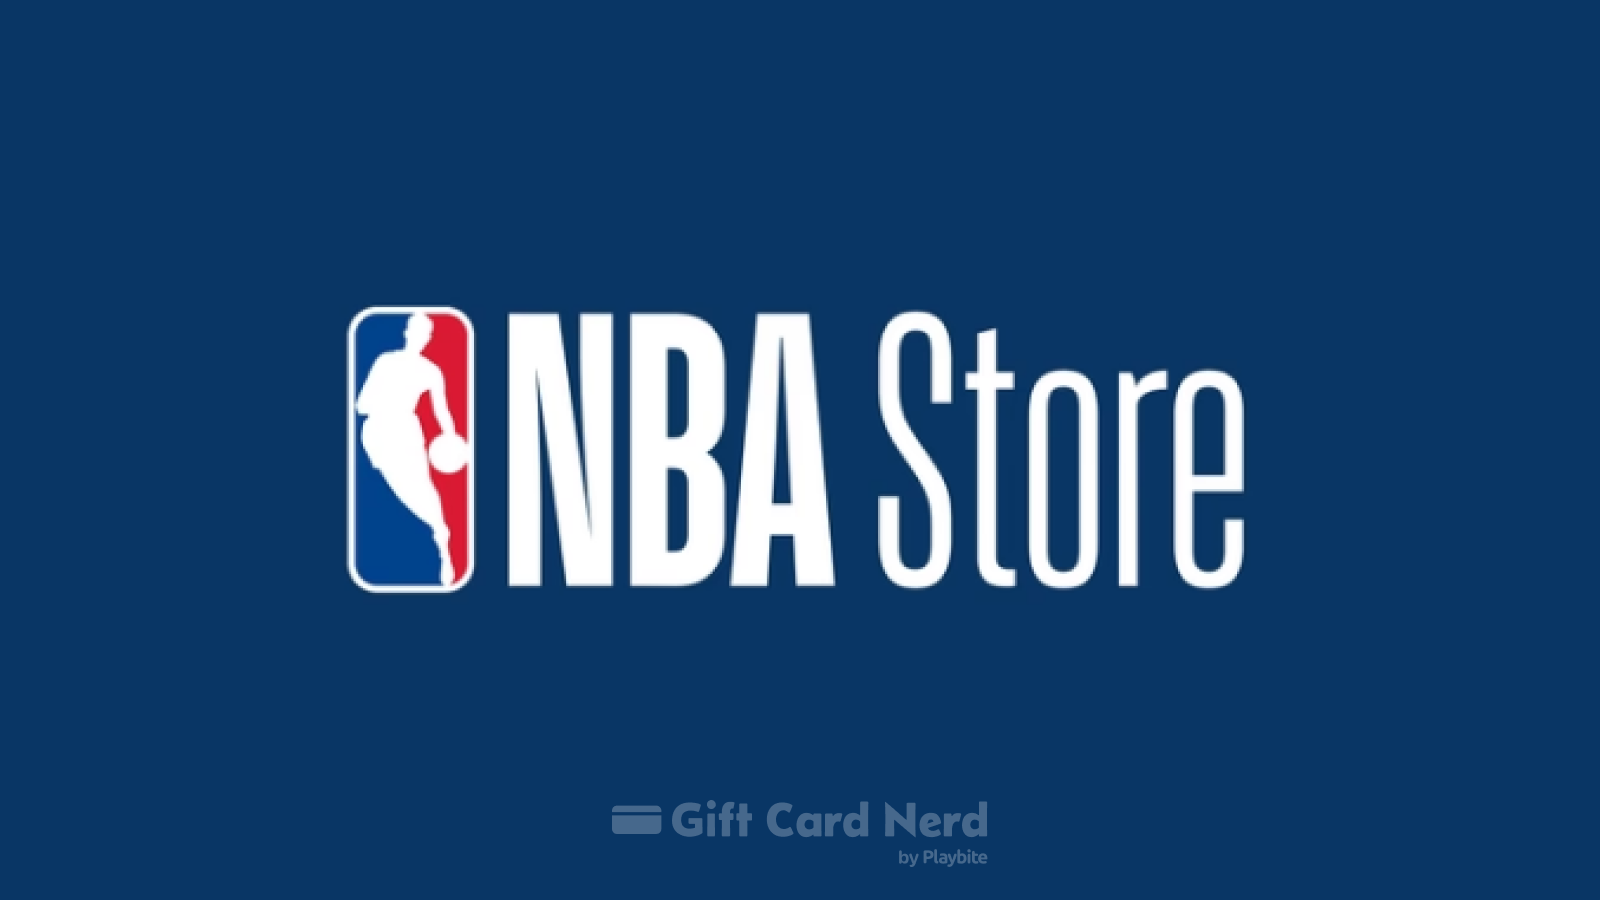 Can I Use an NBA Store Gift Card on Uber Eats?